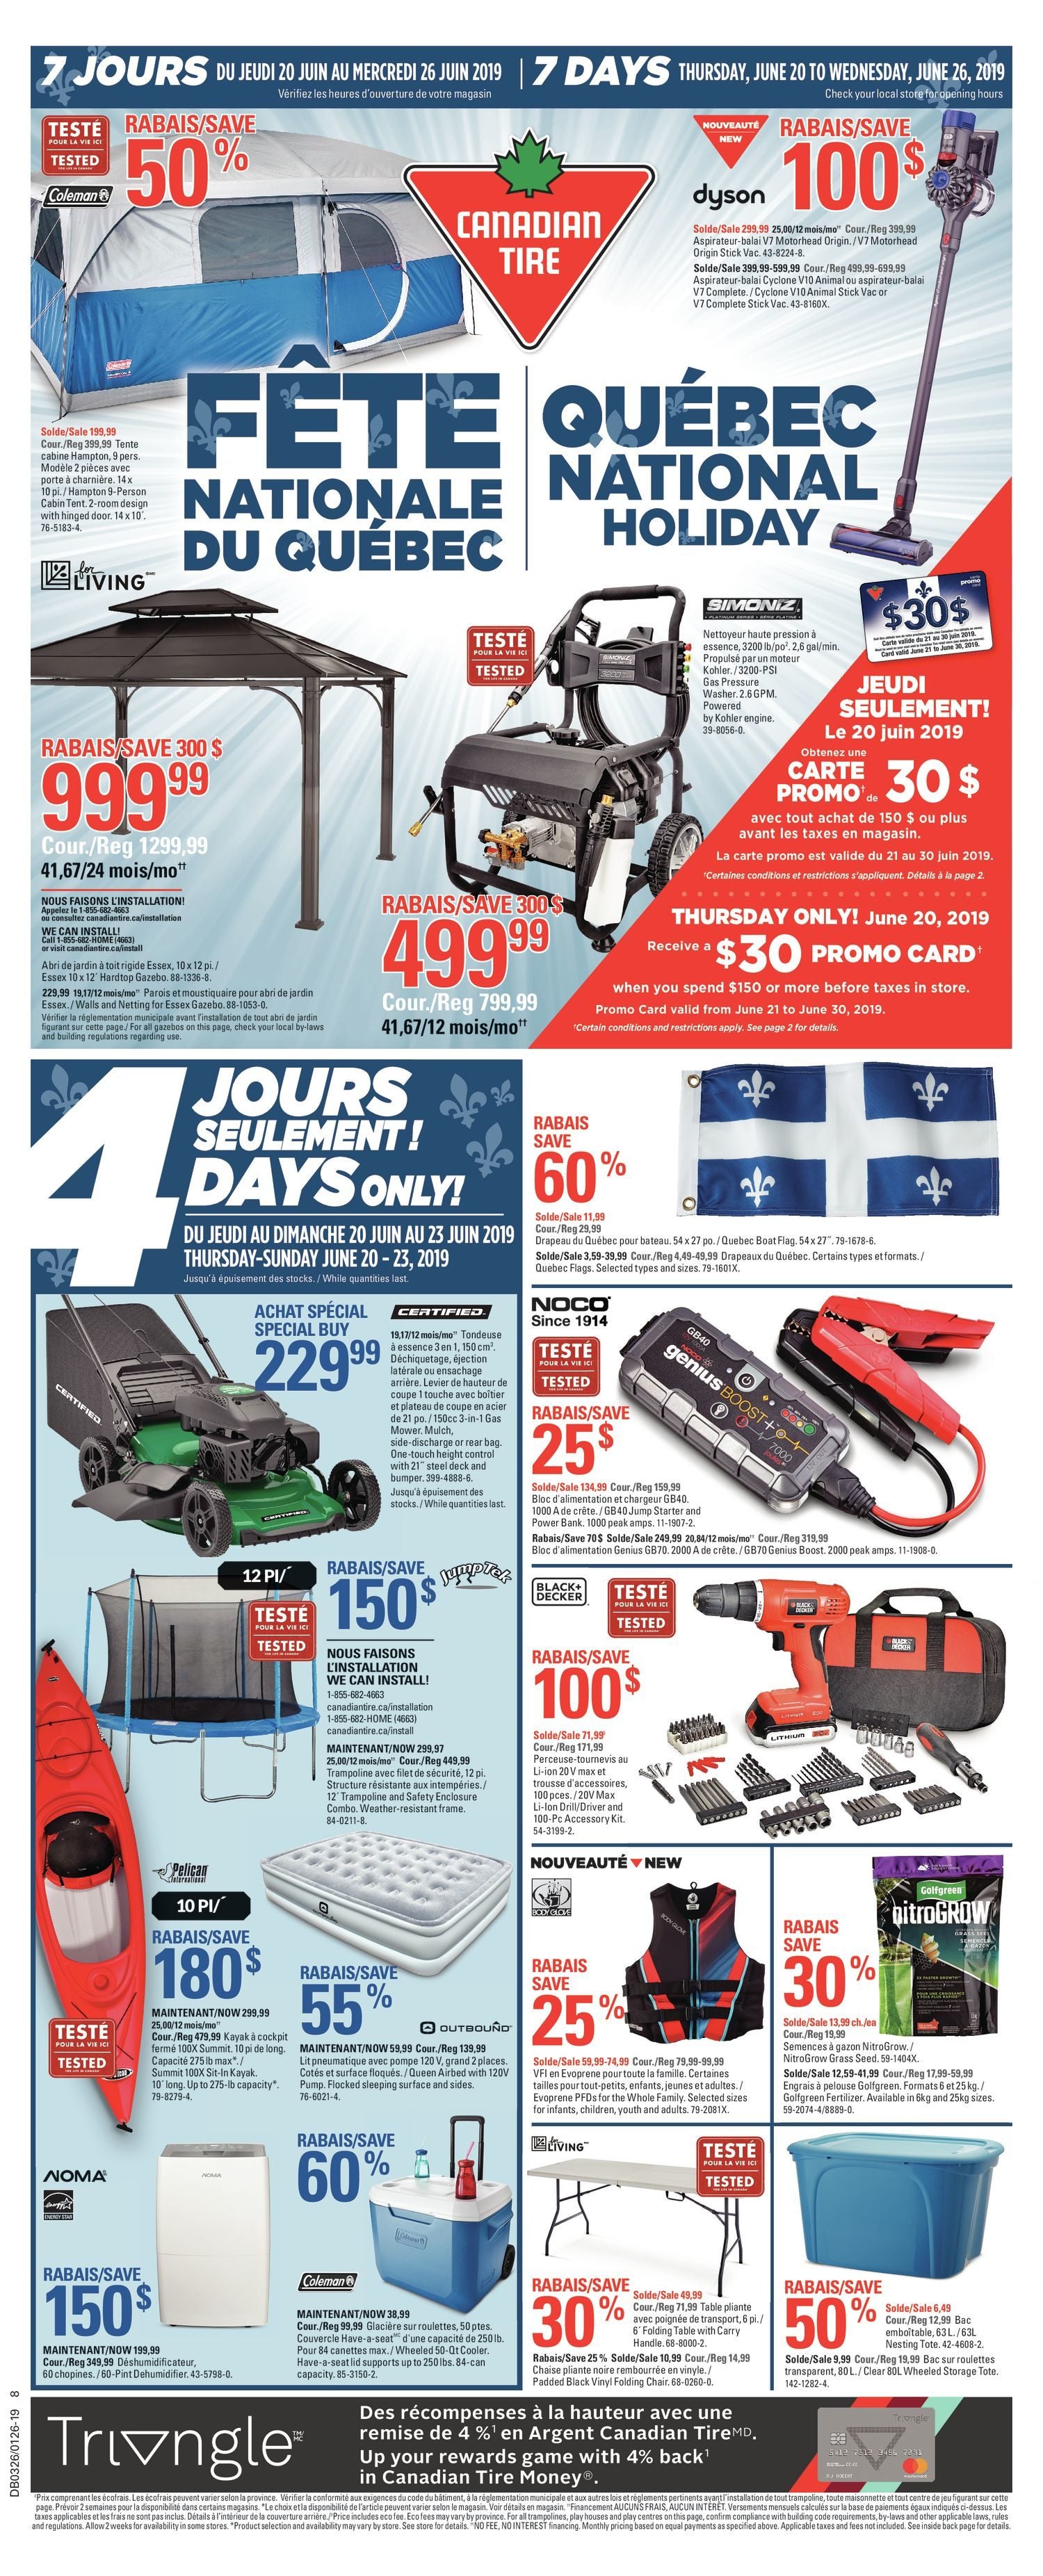 Canadian Tire Weekly Flyer 7 Days Of Savings Quebec National